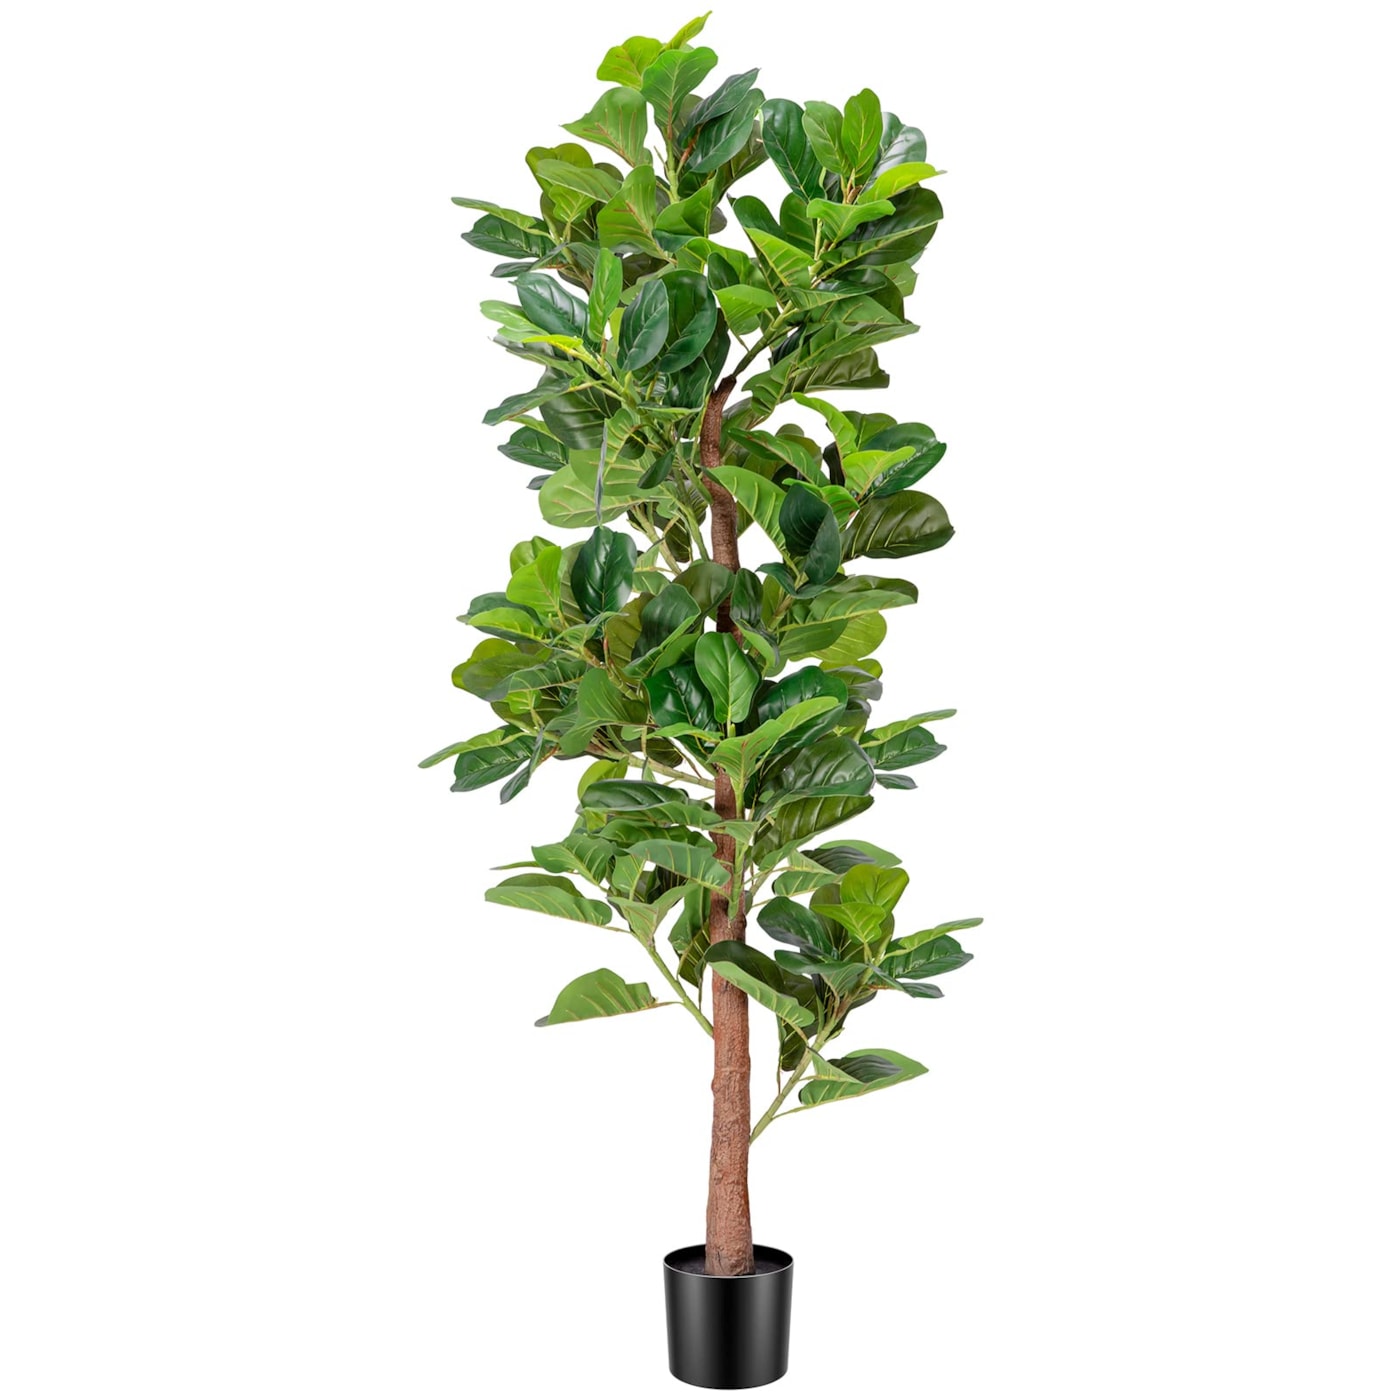 VIVOSUN 6 ft. Artificial Fiddle Leaf Fig Tree, with Adjustable Branches, Faux Tree Potted Plant Fake Plant for Indoor or Outdoor Modern Decor for Home, Office and Balcony